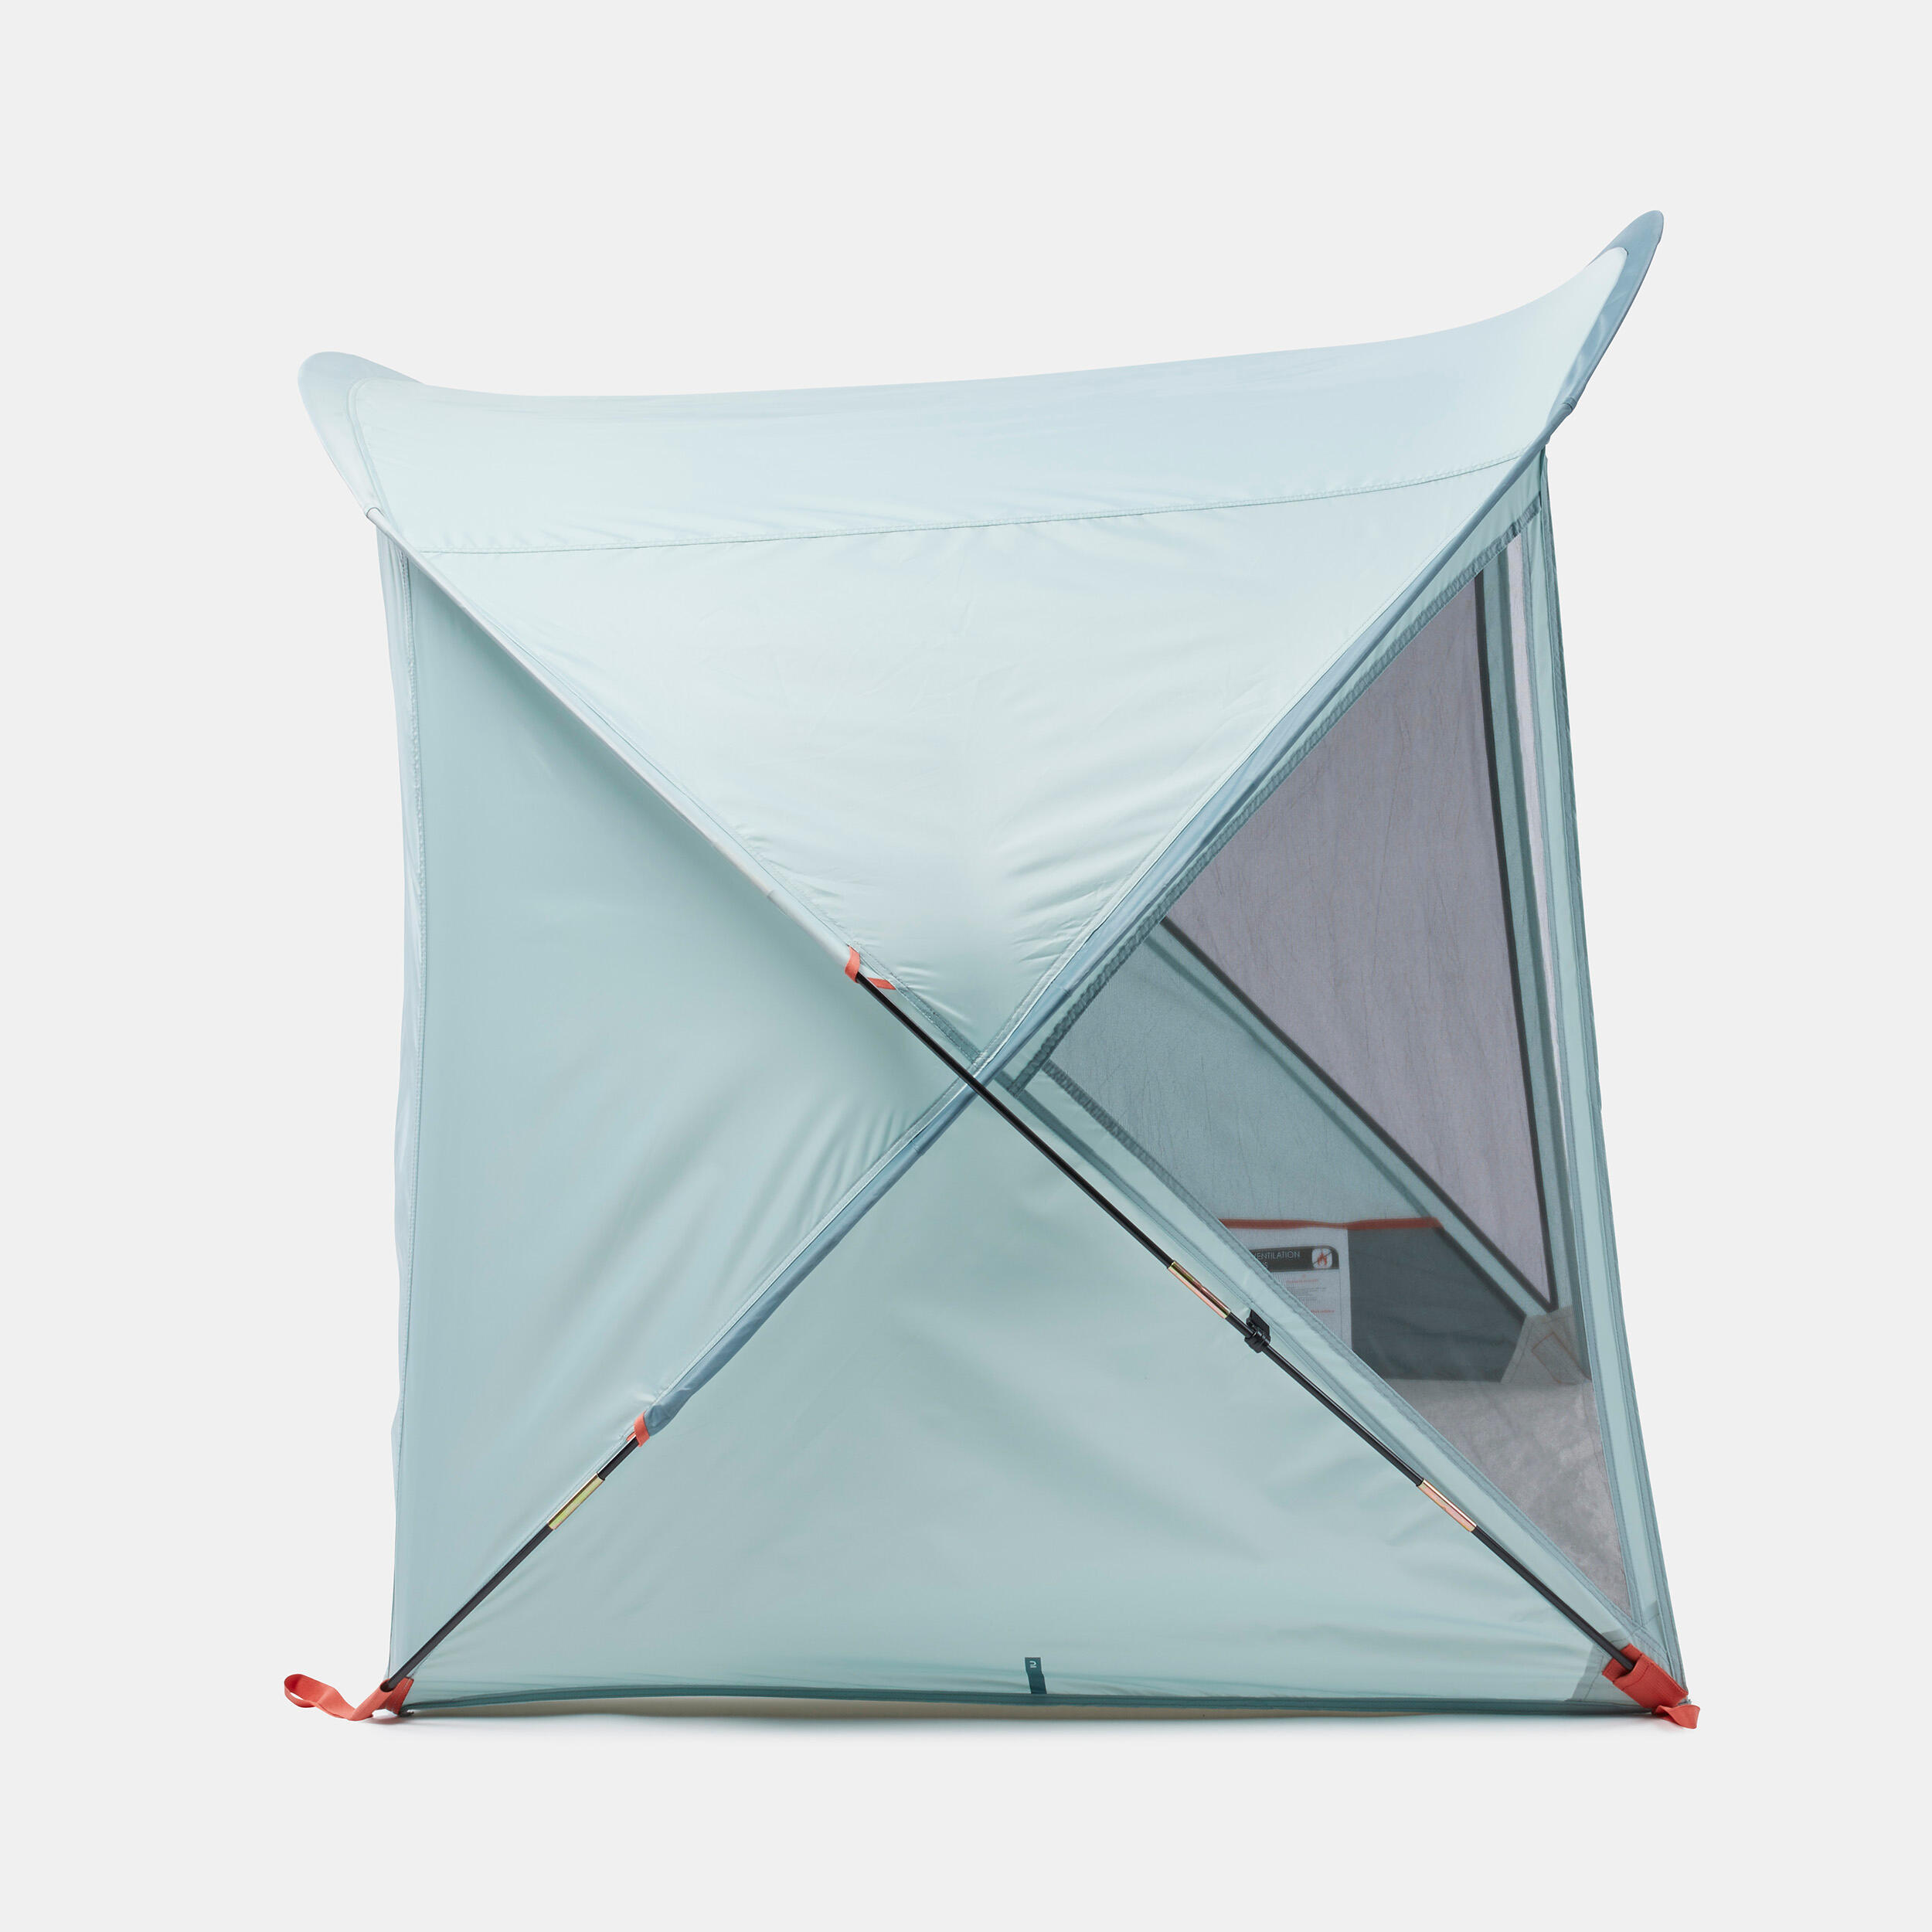 Camping Shelter with Poles - 4 person - Arpenaz 4P 4/10